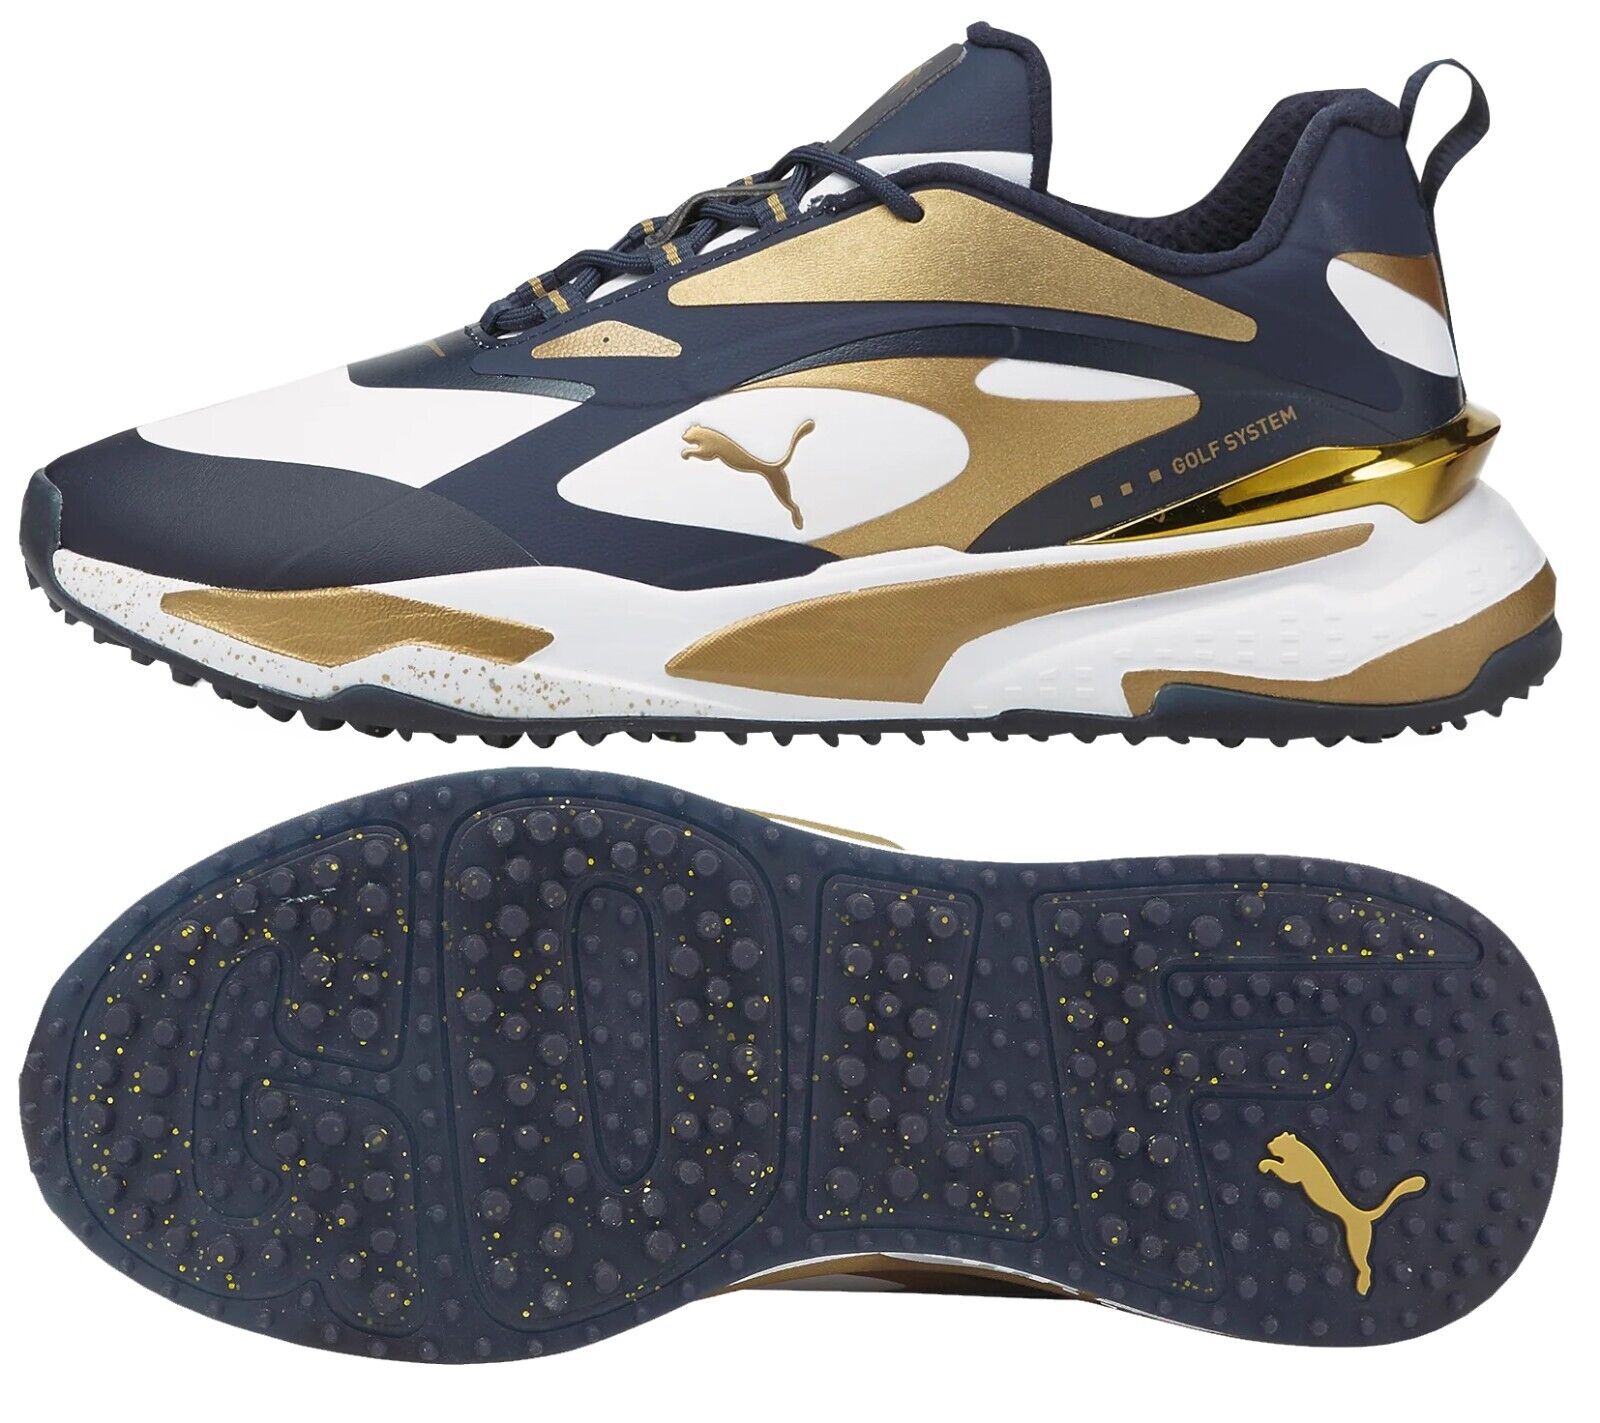 Puma Golf x Palm Tree Crew】GS-FAST Spikeless Shoes お値下通販 スポーツ